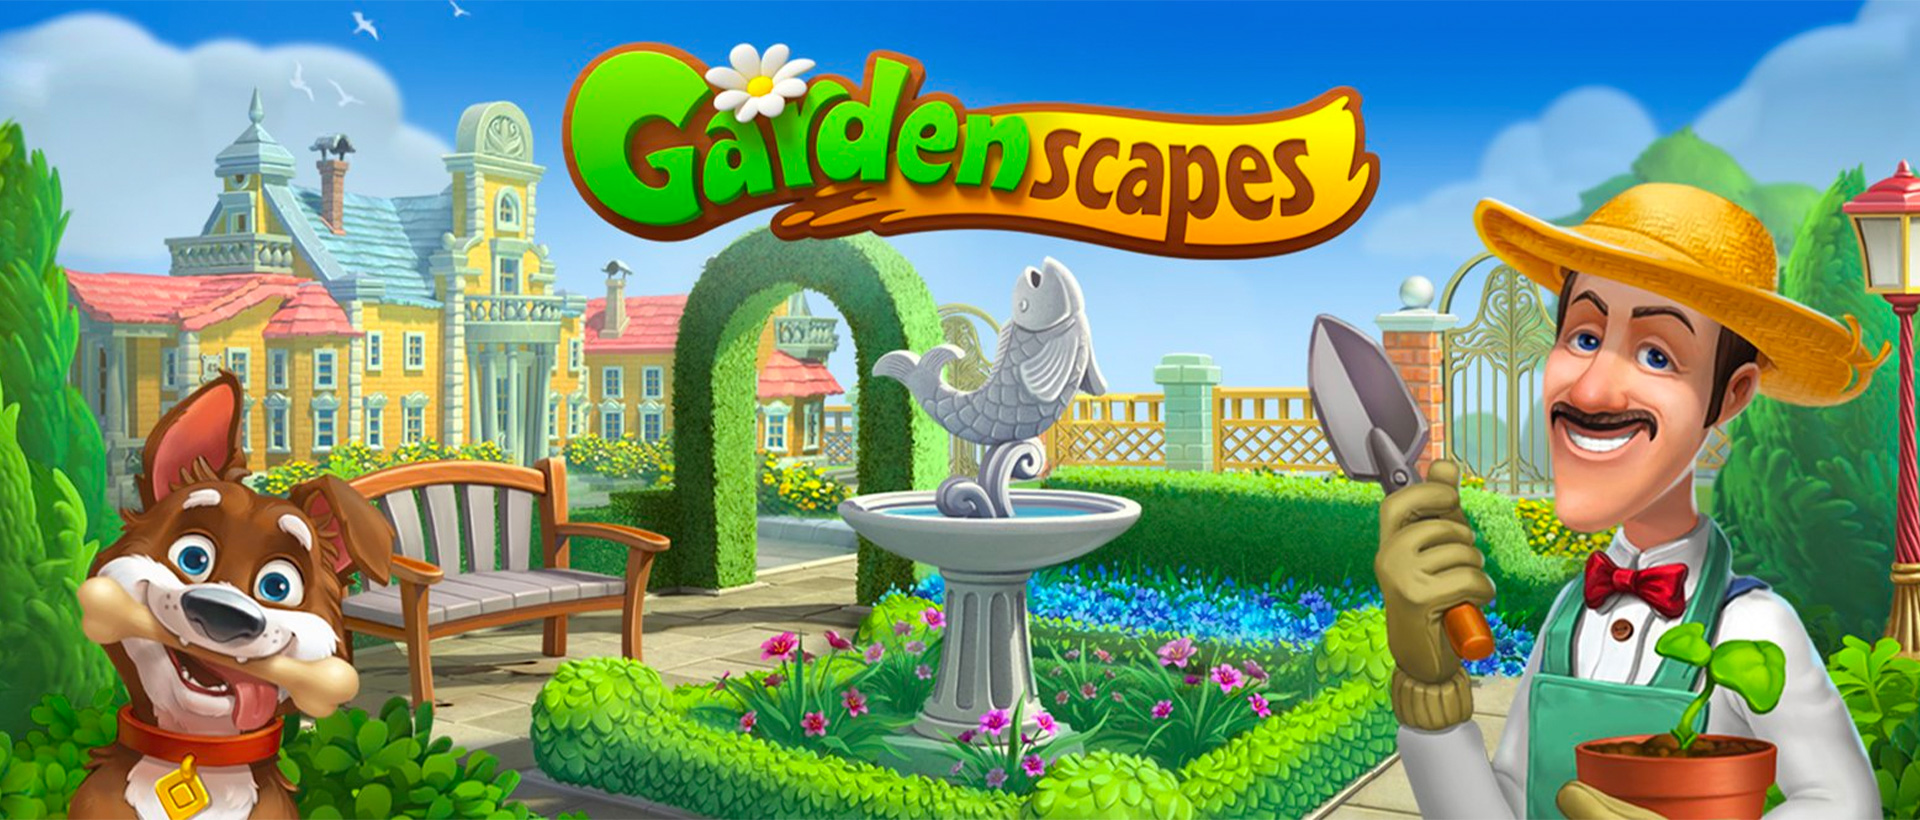 gardenscapes for pc full version